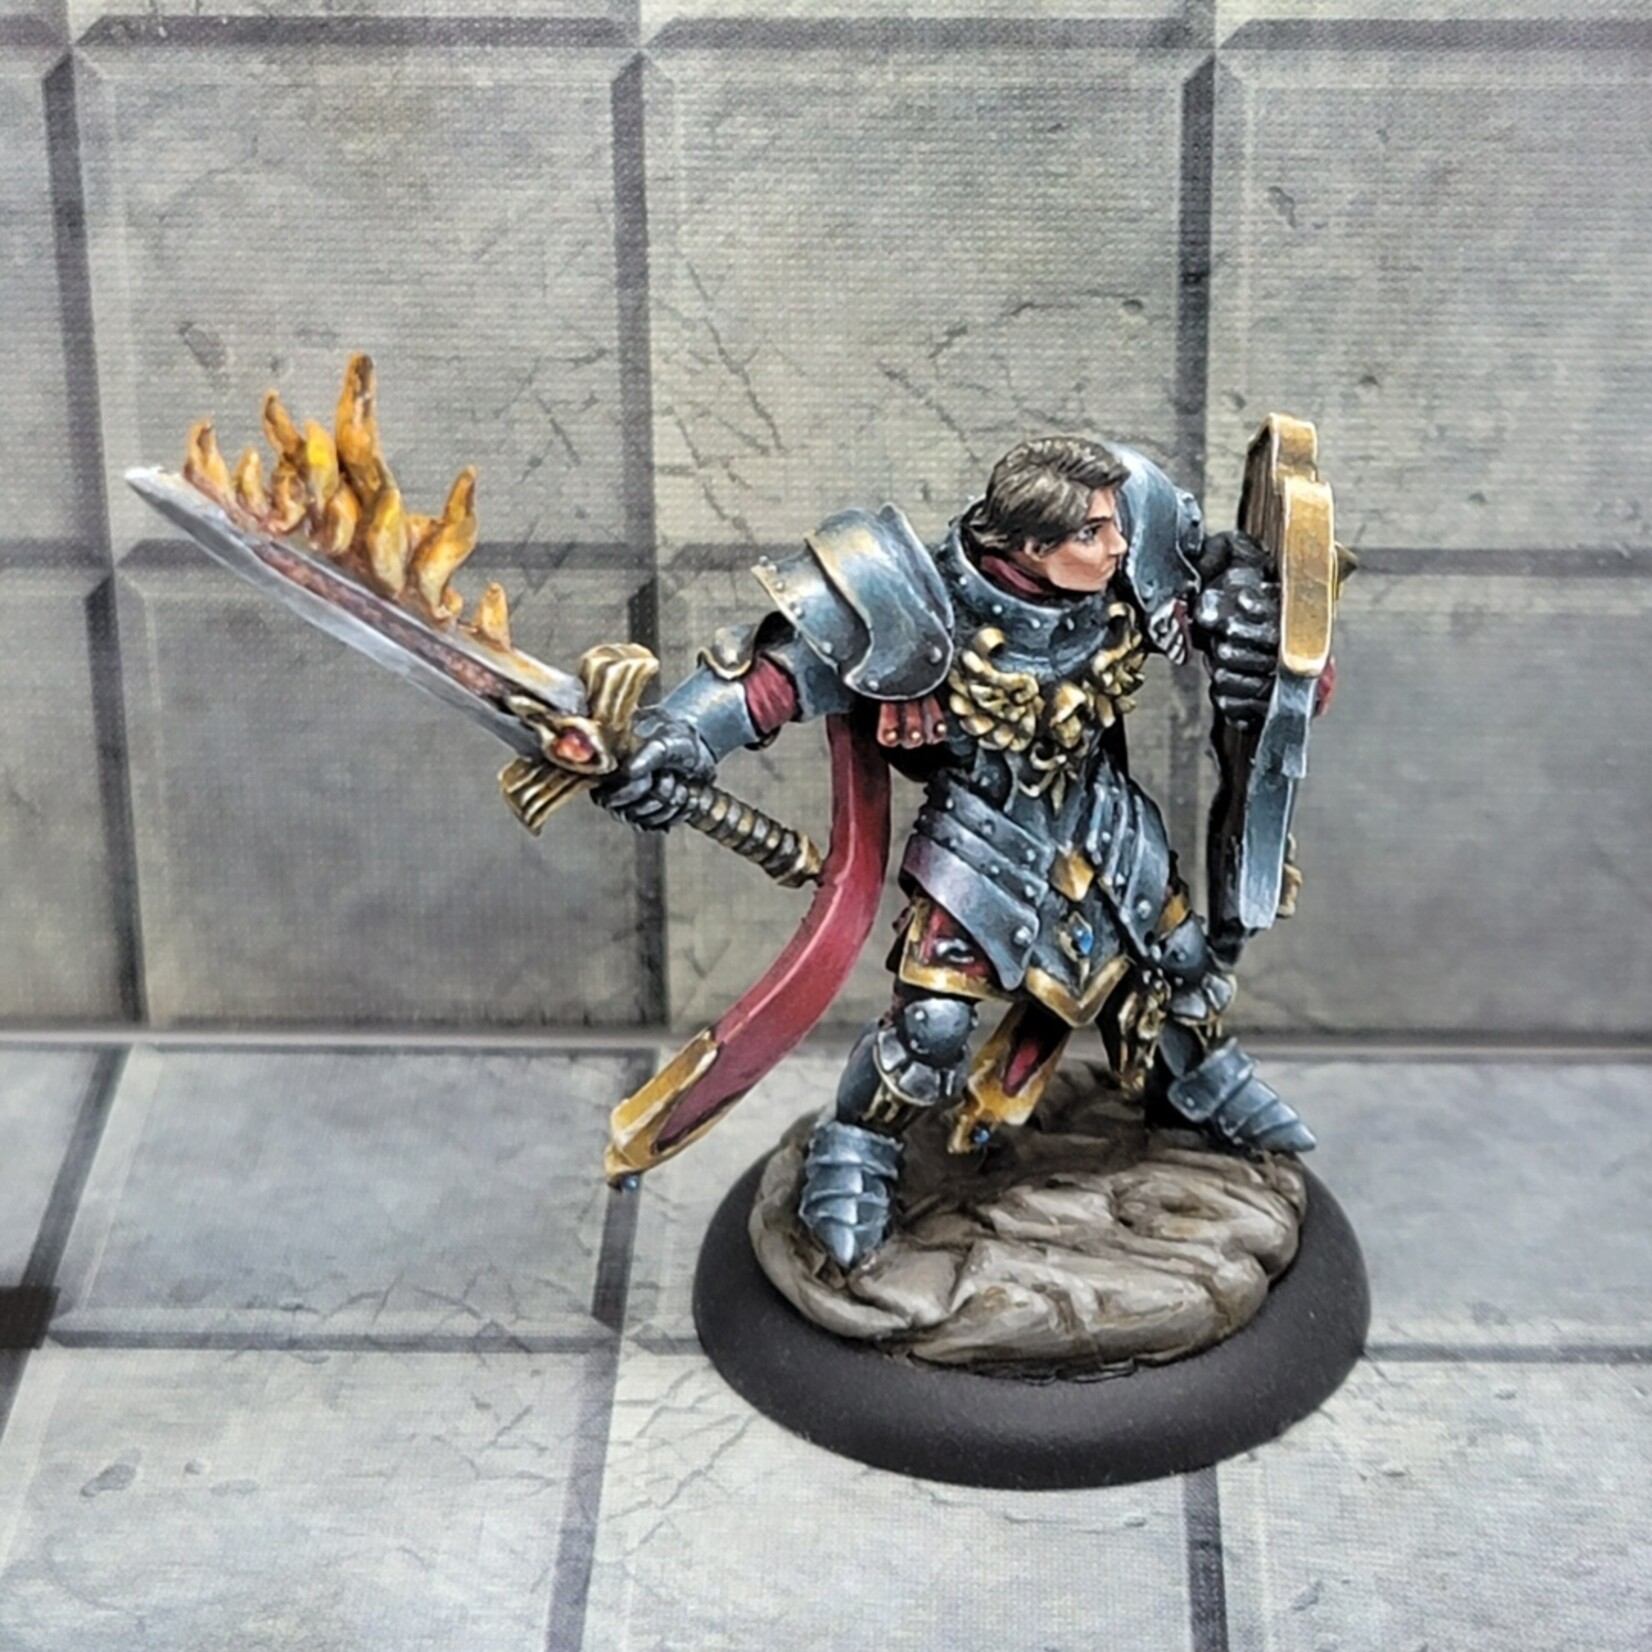 Almaron the Paladin - by Glyn Evans